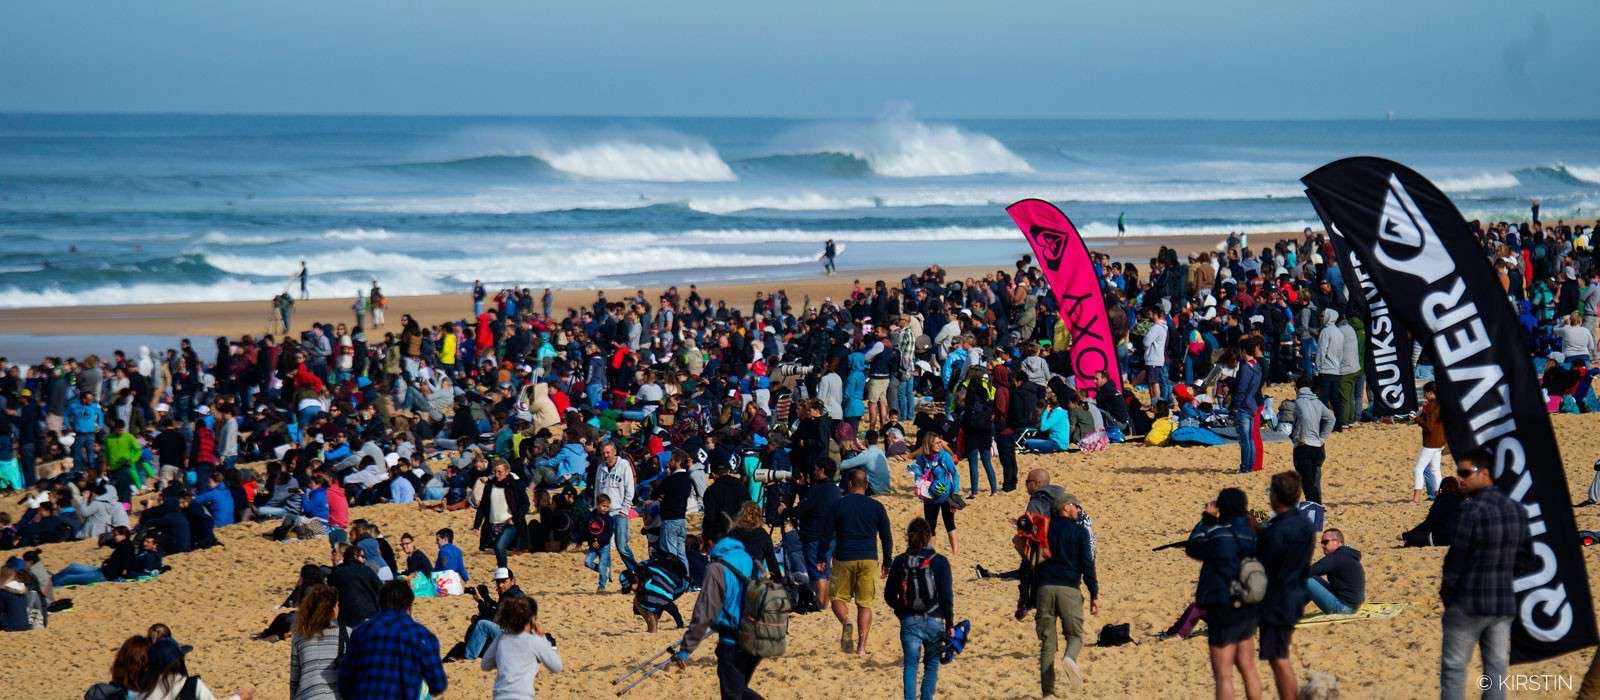 13-facts-about-quiksilver-pro-surfing-competition